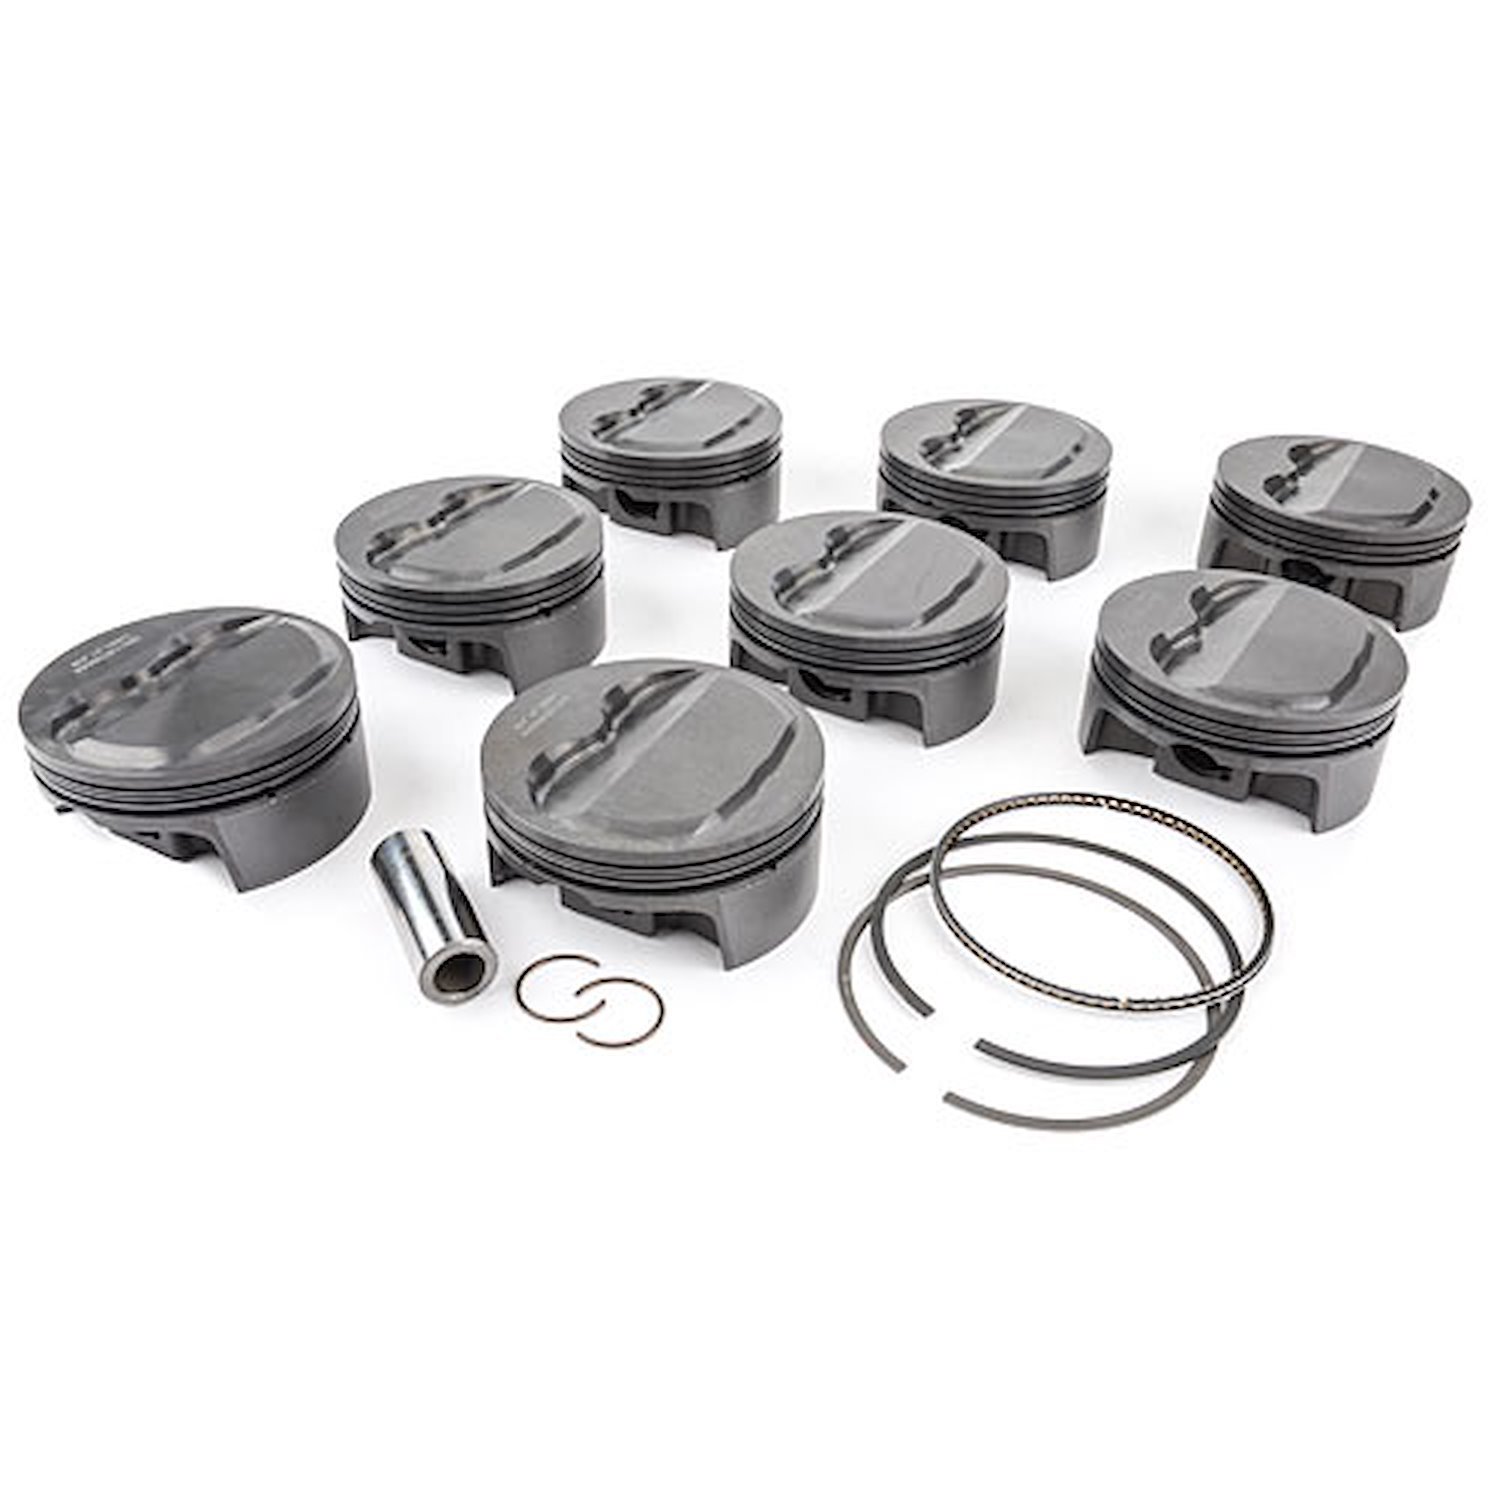 Small Block Chevy PowerPak Piston & Ring Kit Forged 4032 High Silicon Low Expansion Aluminum Alloy